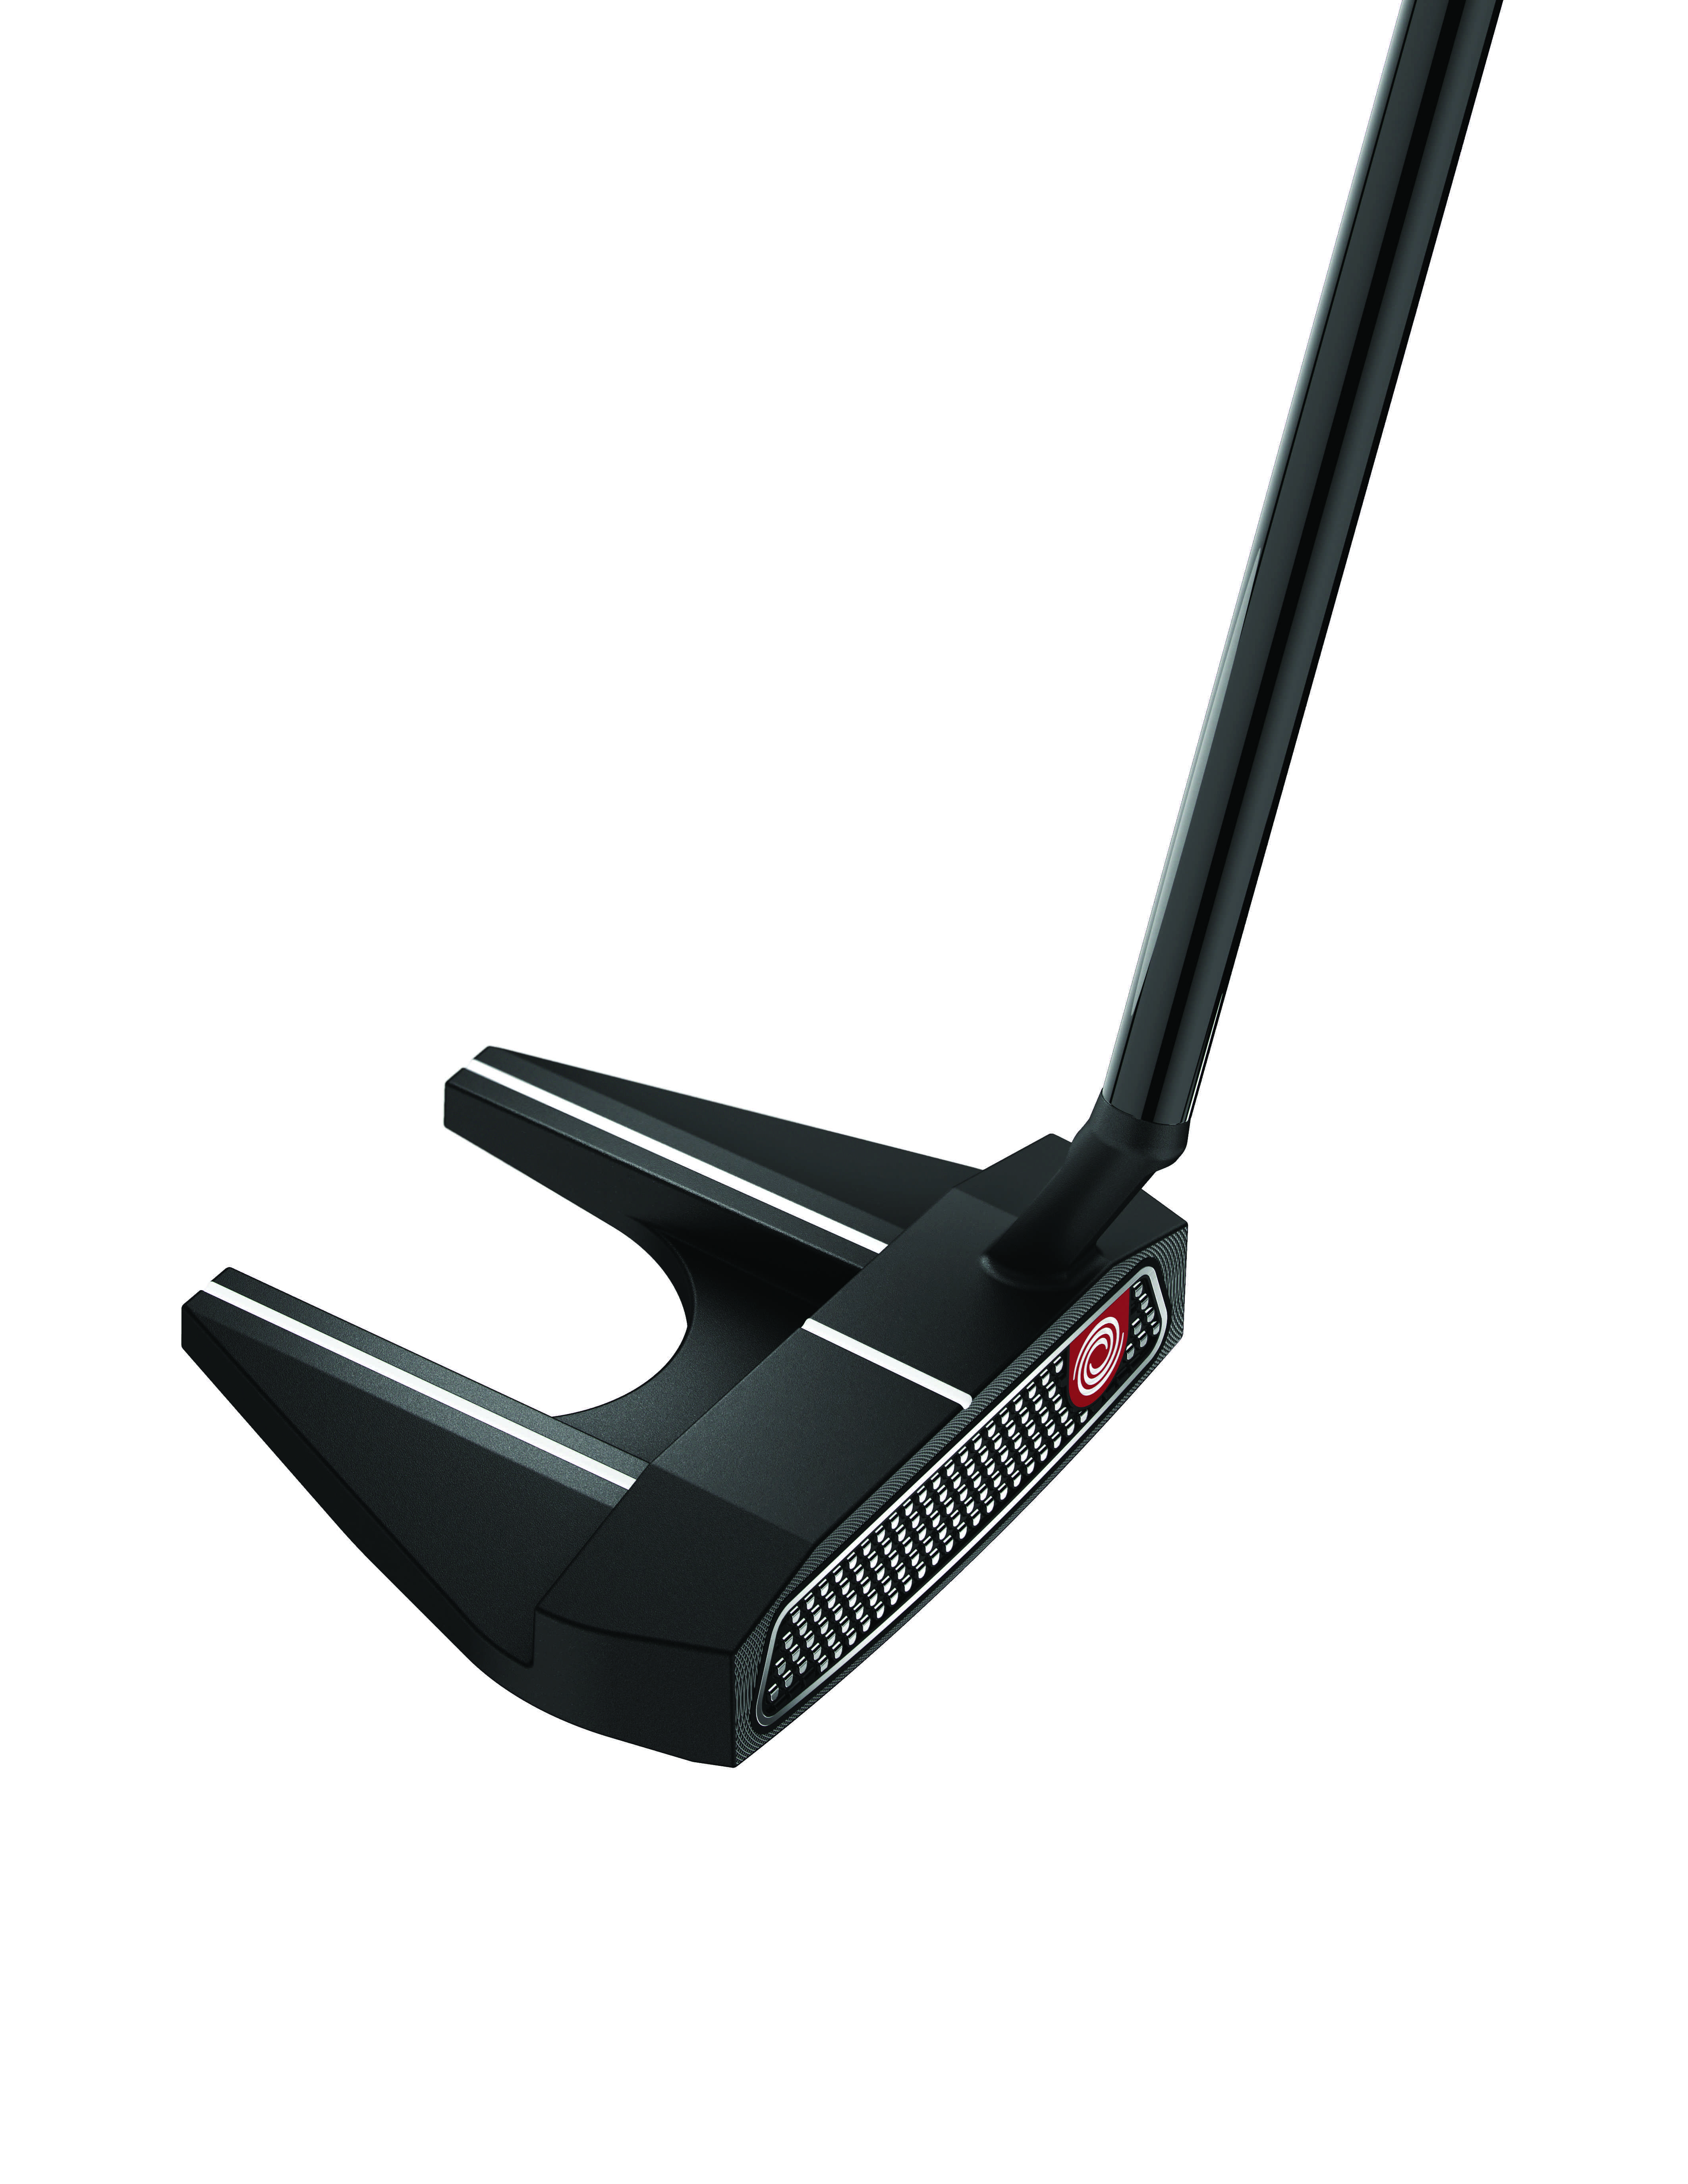 New Odyssey O-Works putters now feature black and red models ...